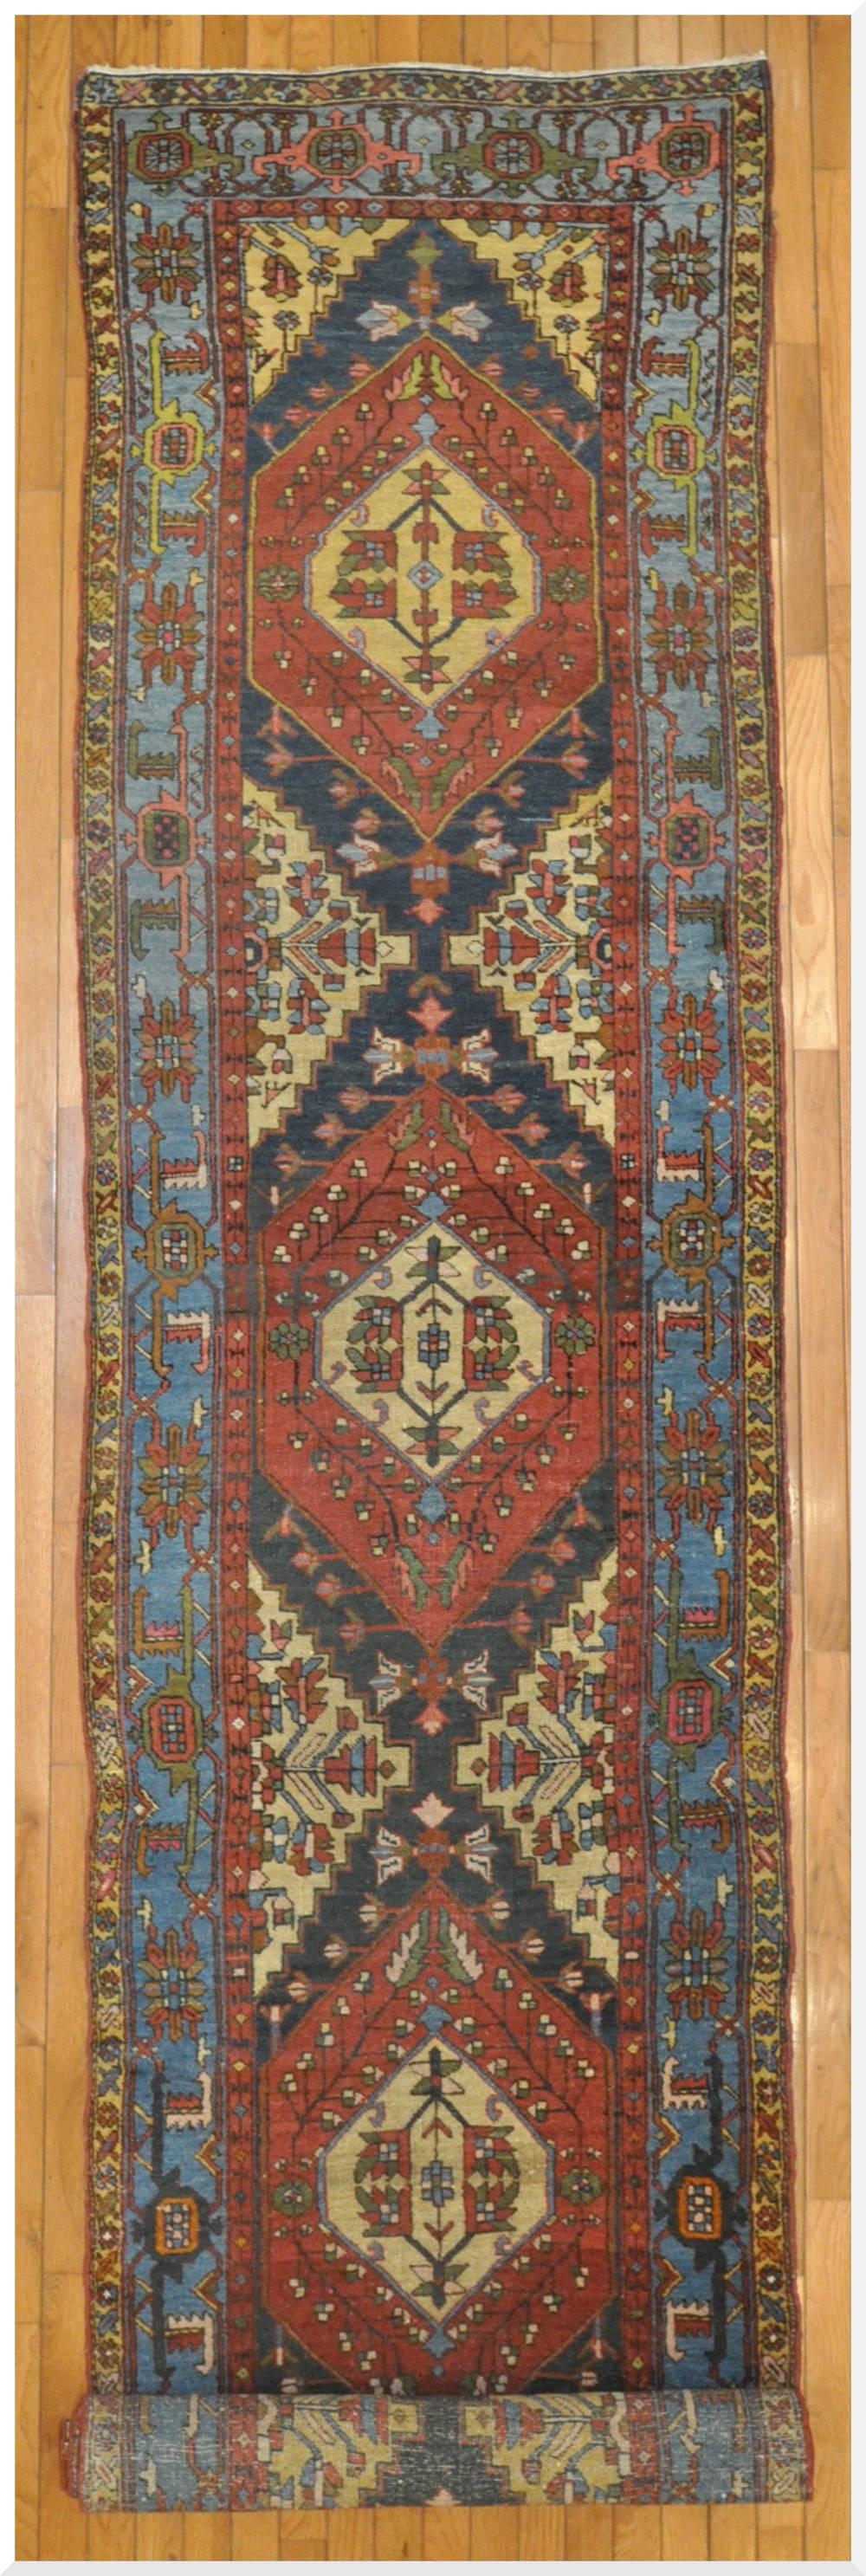 This is a beautiful antique hand-knotted Persian Heriz runner rug with multiple geometric medallion design on a red color field. The rug has a very fine weave and in excellent condition. It measures 2'10'' x 14' 4''.